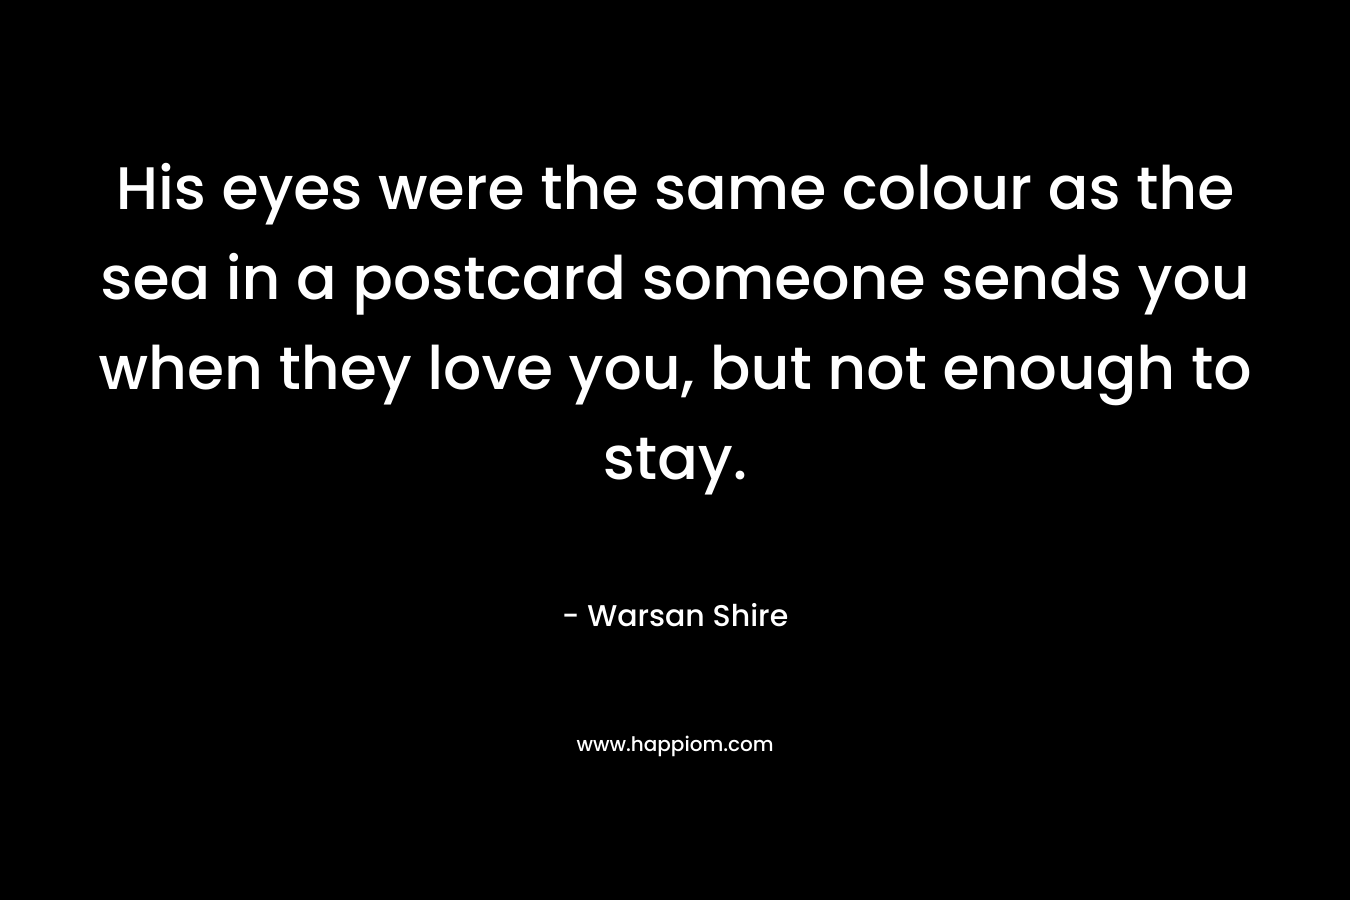 His eyes were the same colour as the sea in a postcard someone sends you when they love you, but not enough to stay.